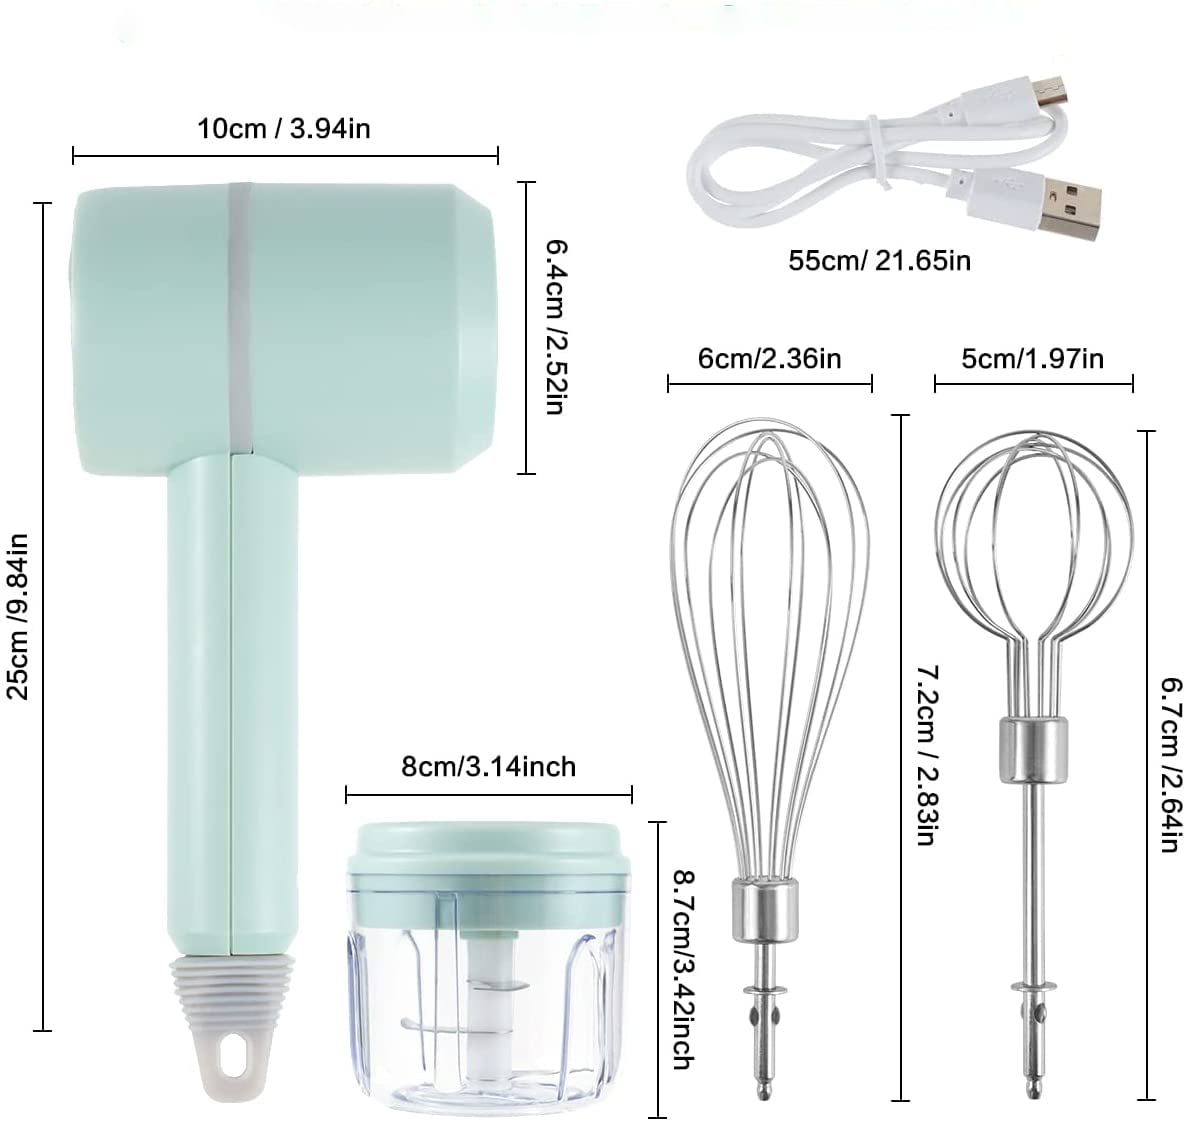 Electric Whisk – Orion Cooker